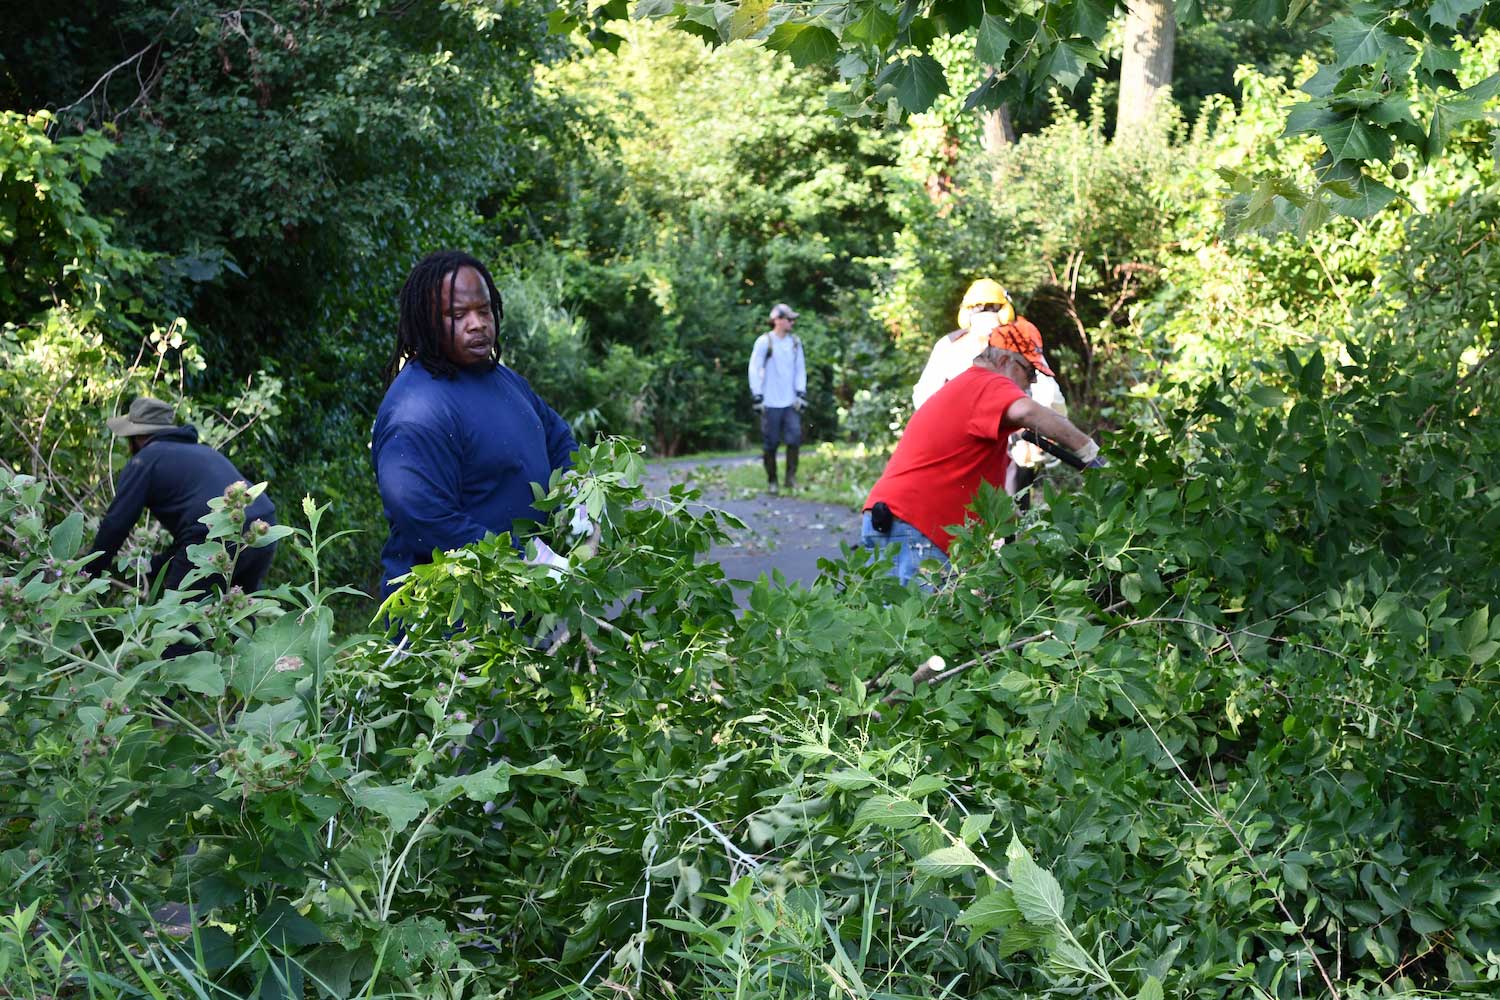 A group of people clearing brush along a trail.